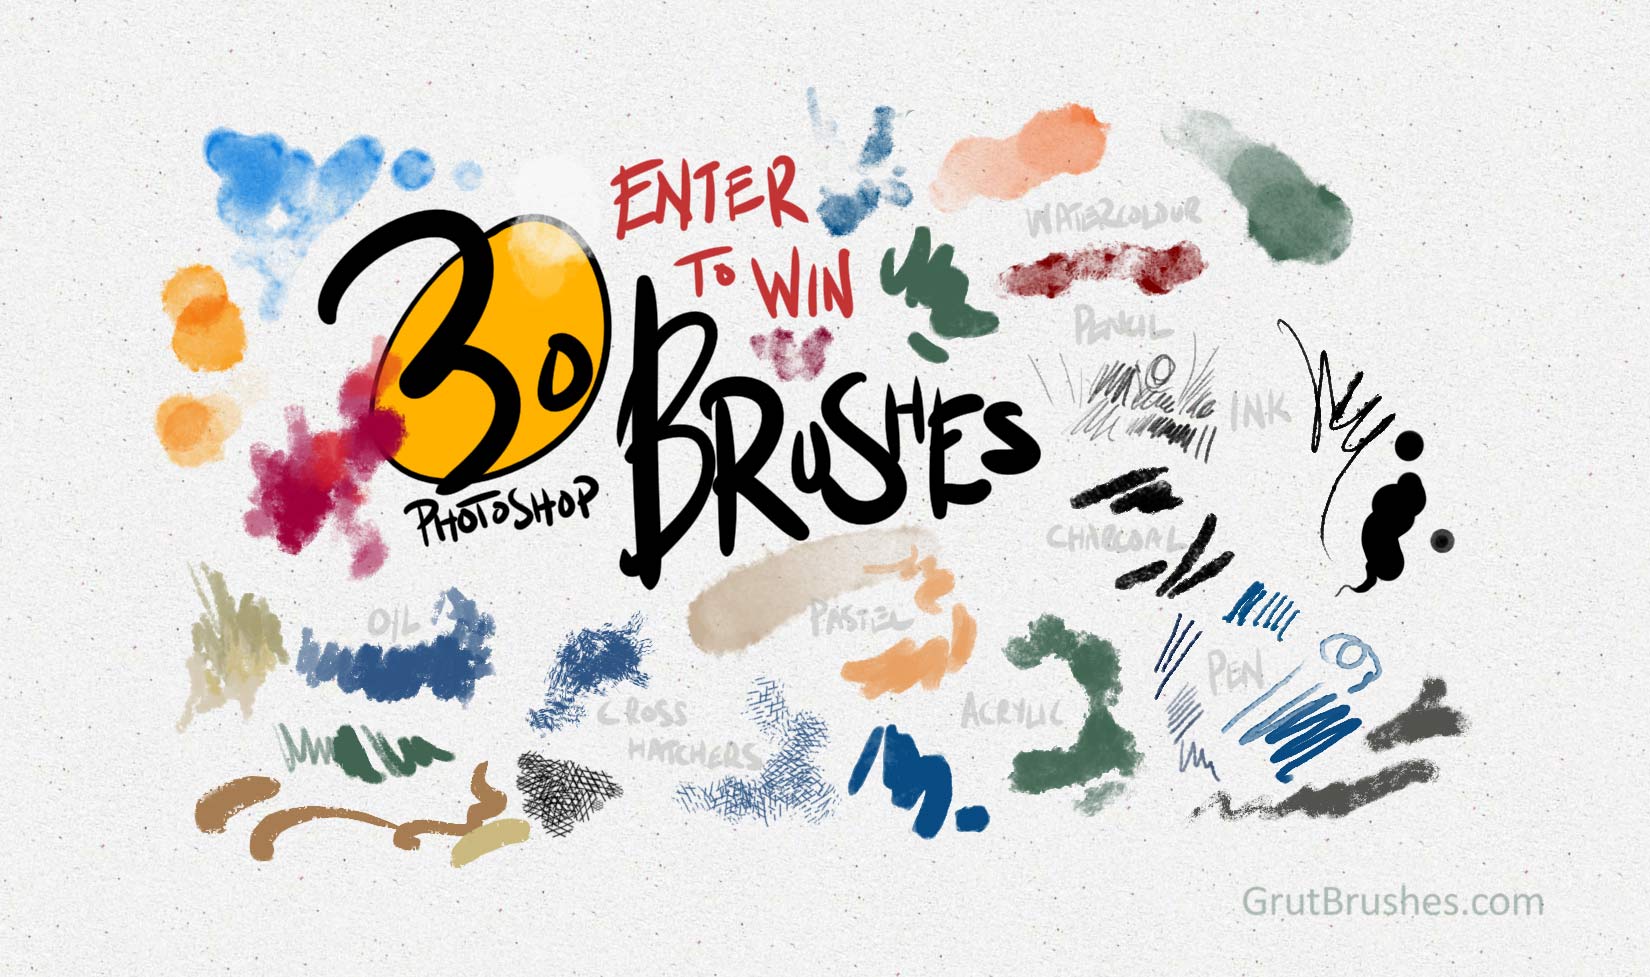 Win 30 realistic natural media Photoshop brushes for digital painters and illustrators